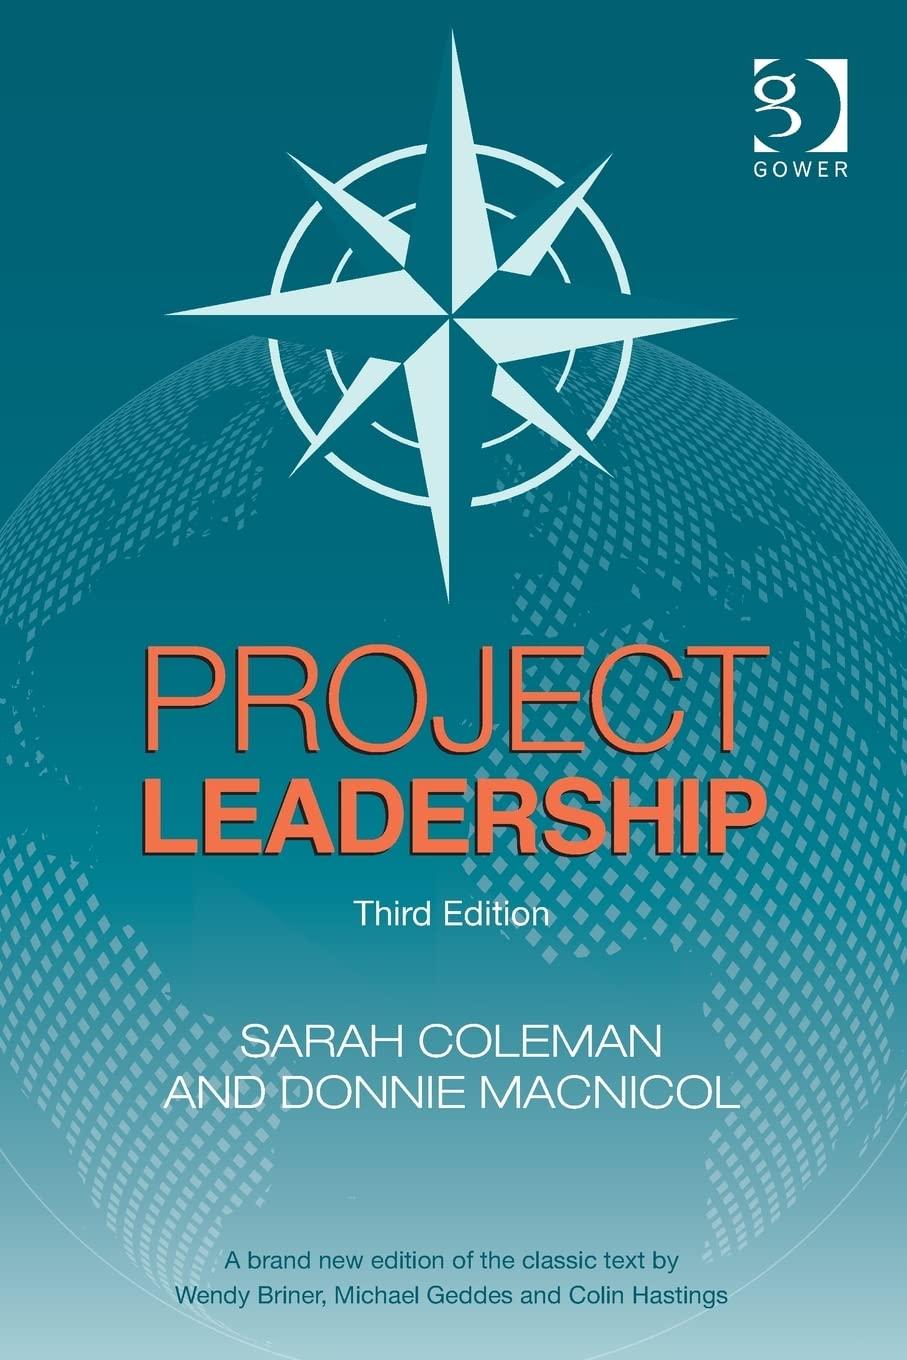 project leadership 3rd edition sarah coleman, donnie macnicol 1472452801, 9781472452801